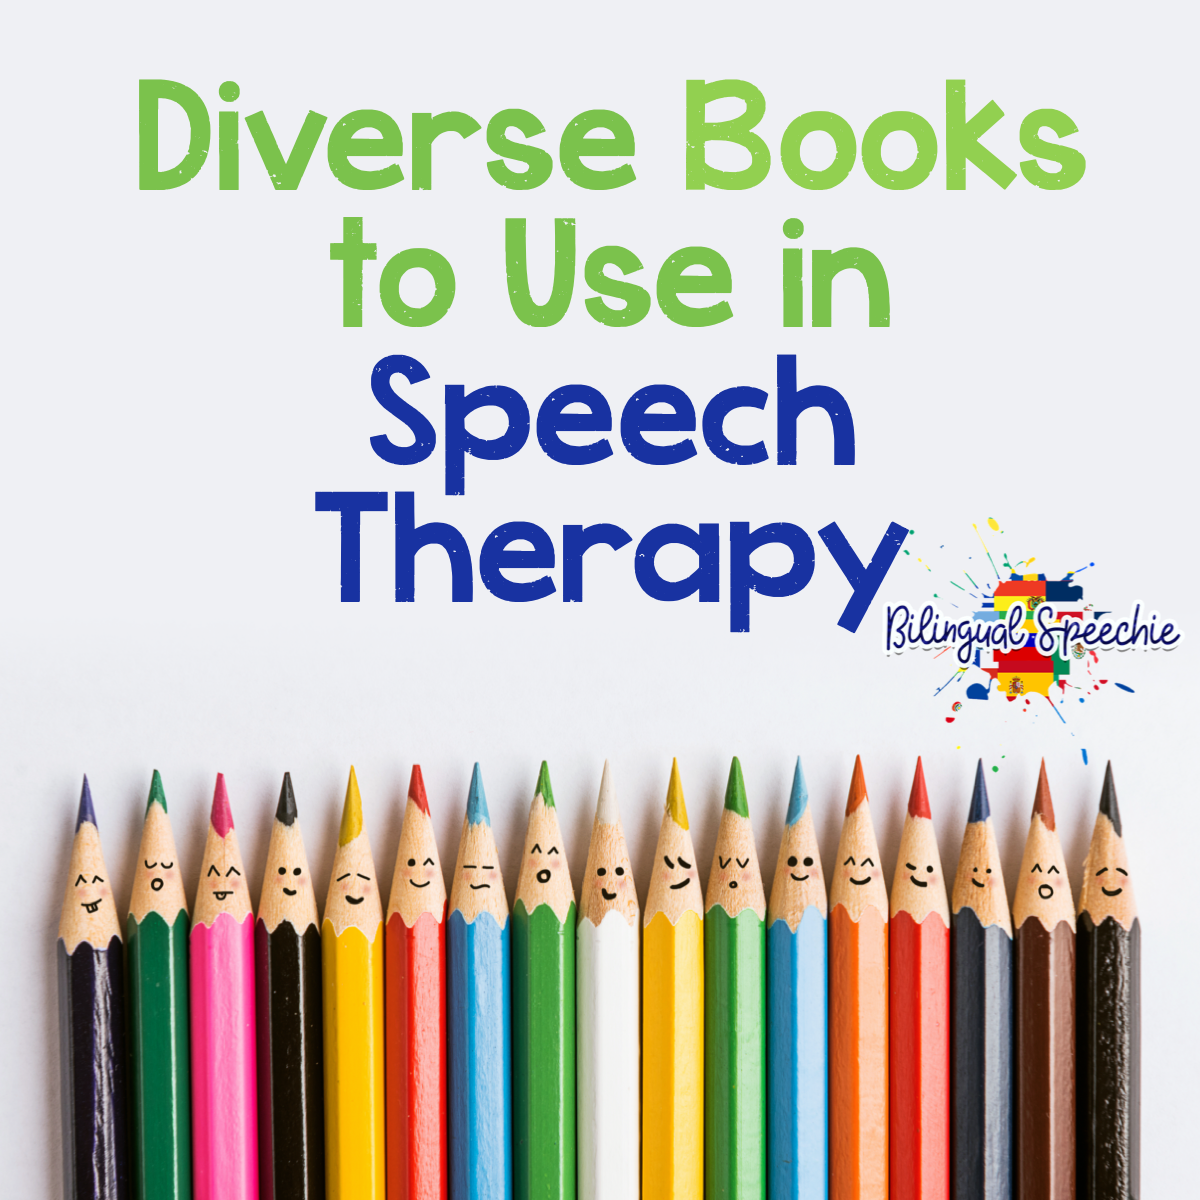 Diverse Books to Use in Speech Therapy